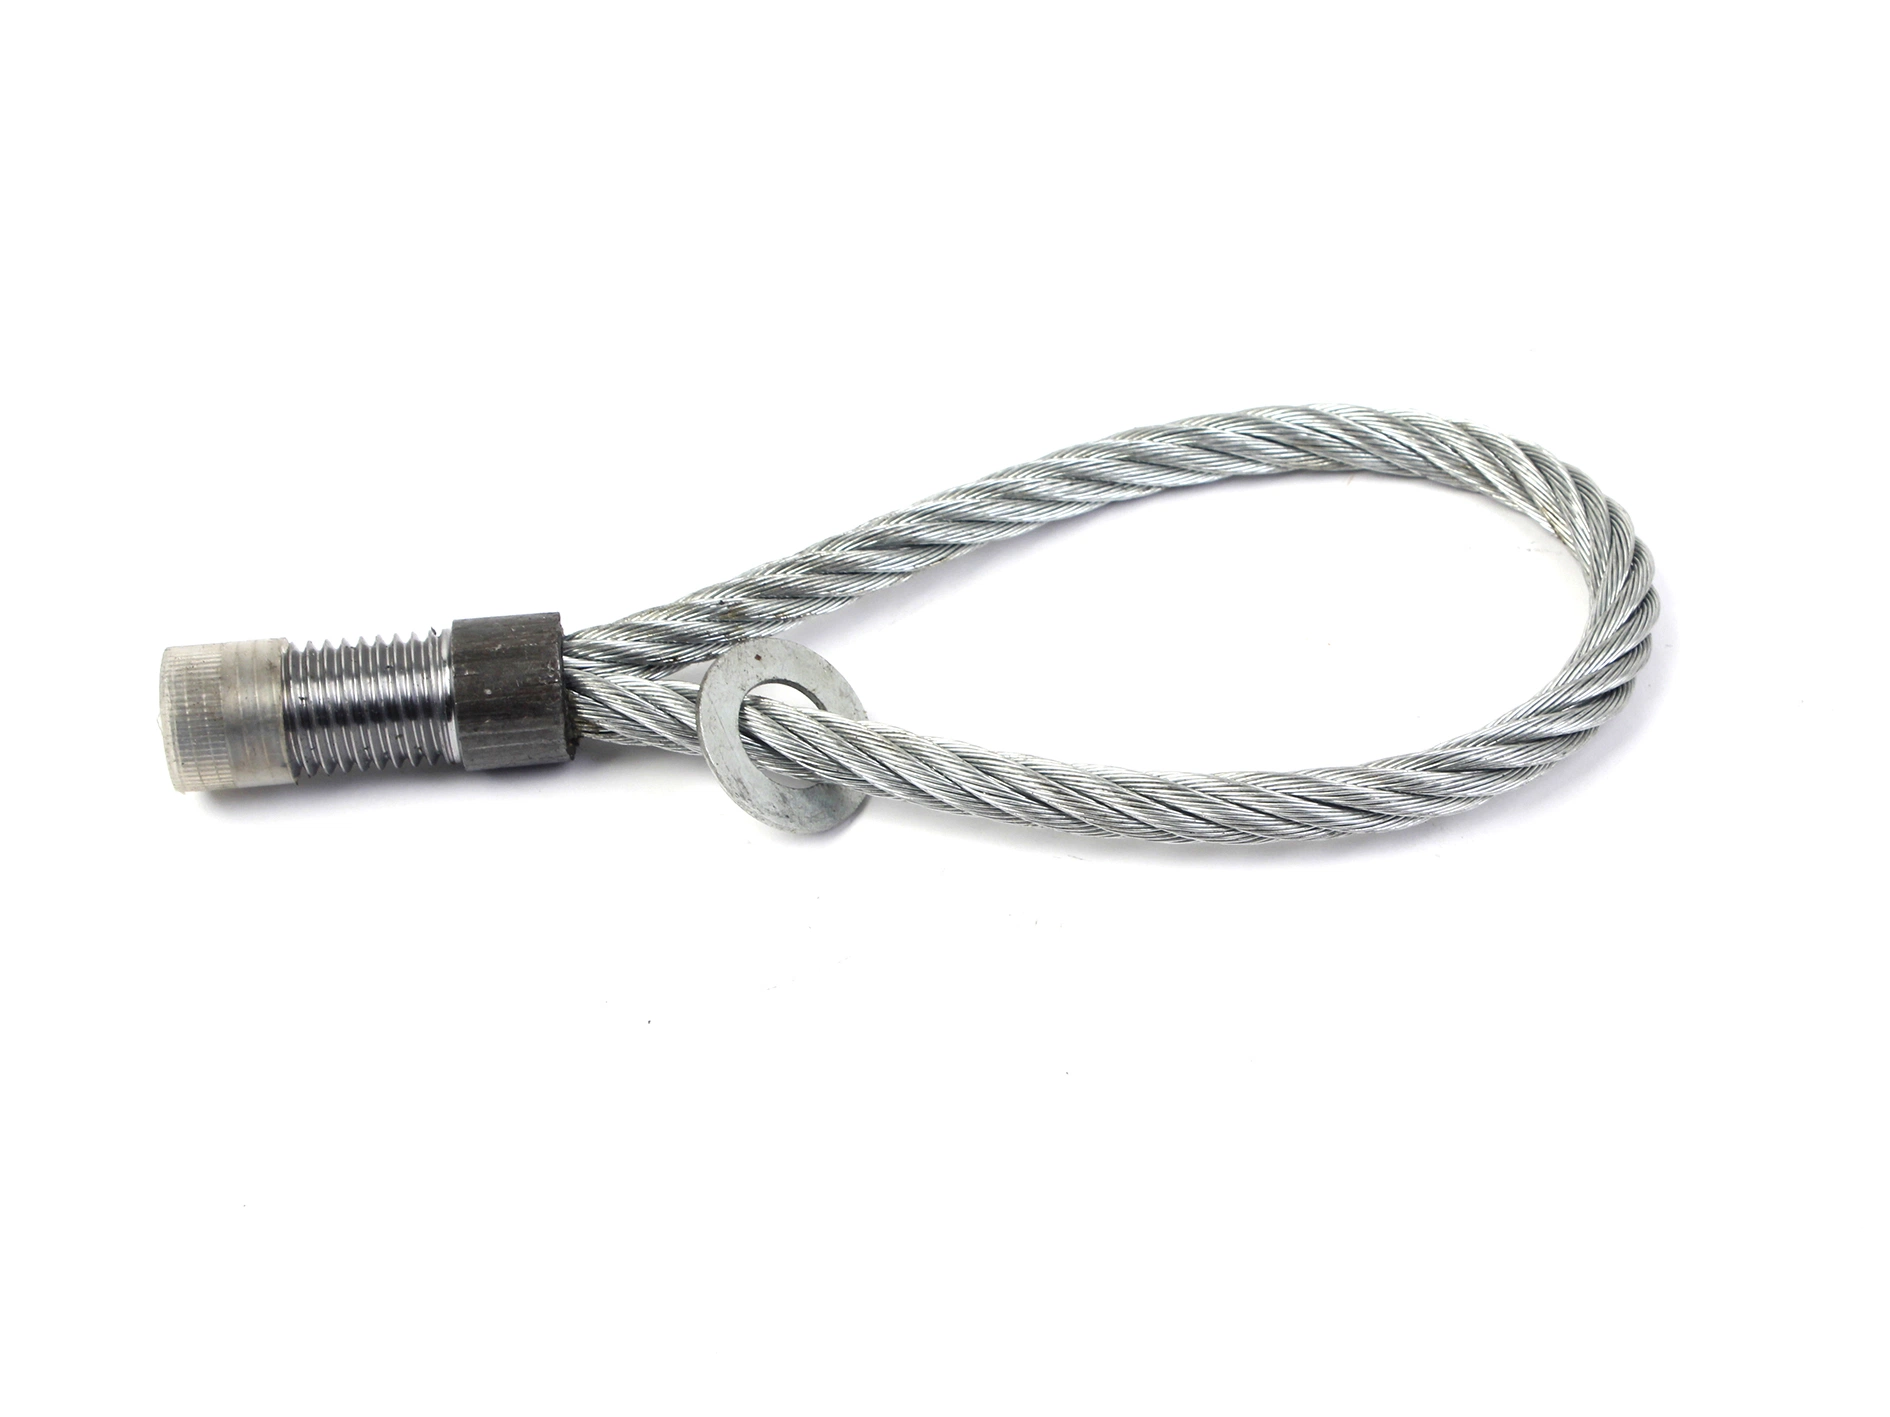 Lifting Sling Insert Braided Steel Wire Rope Sling Assembly Reinforced Threaded Sleeve